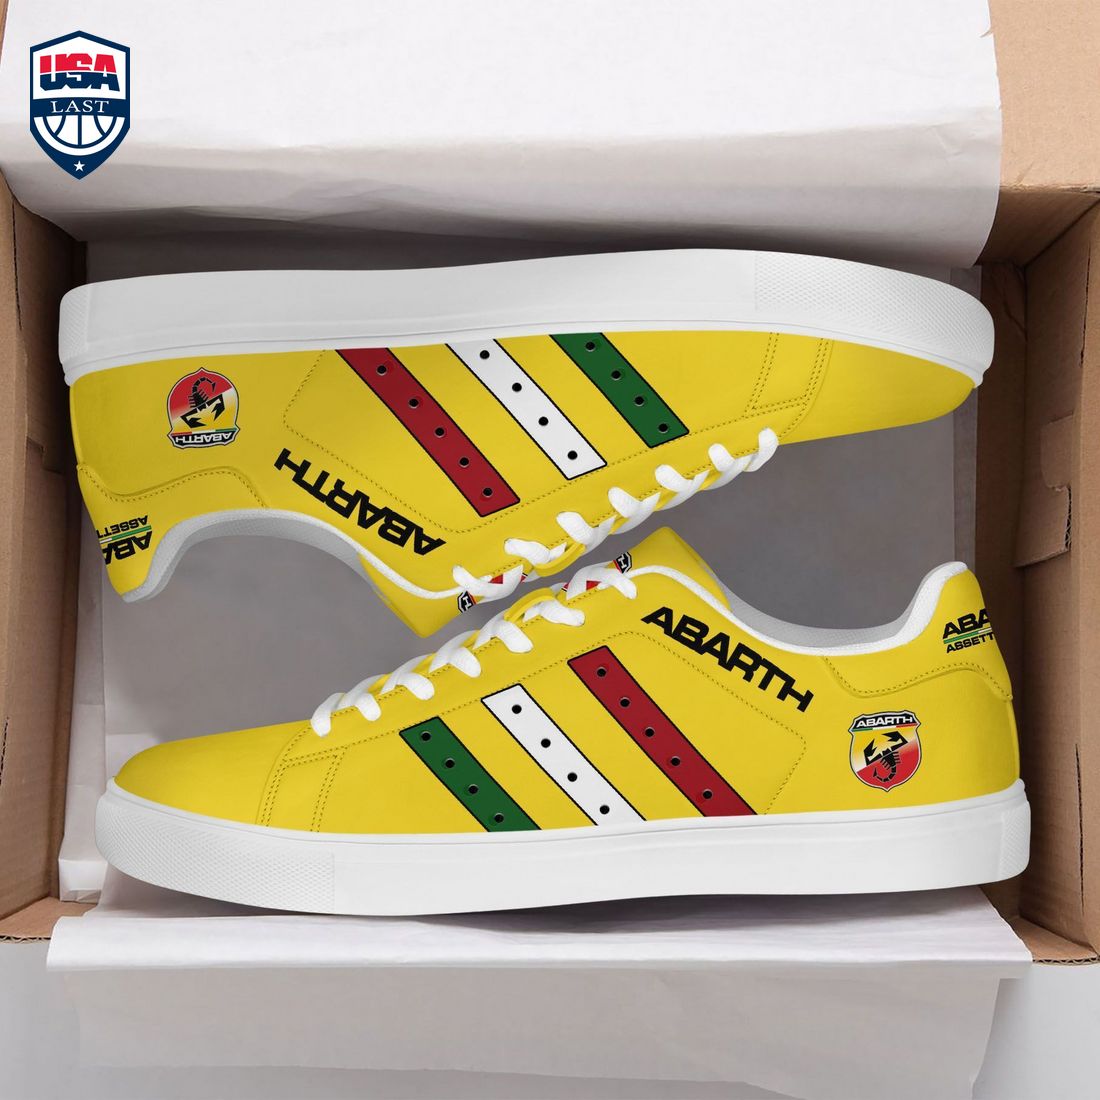 abarth-red-white-green-stripes-style-5-stan-smith-low-top-shoes-1-aK5jf.jpg